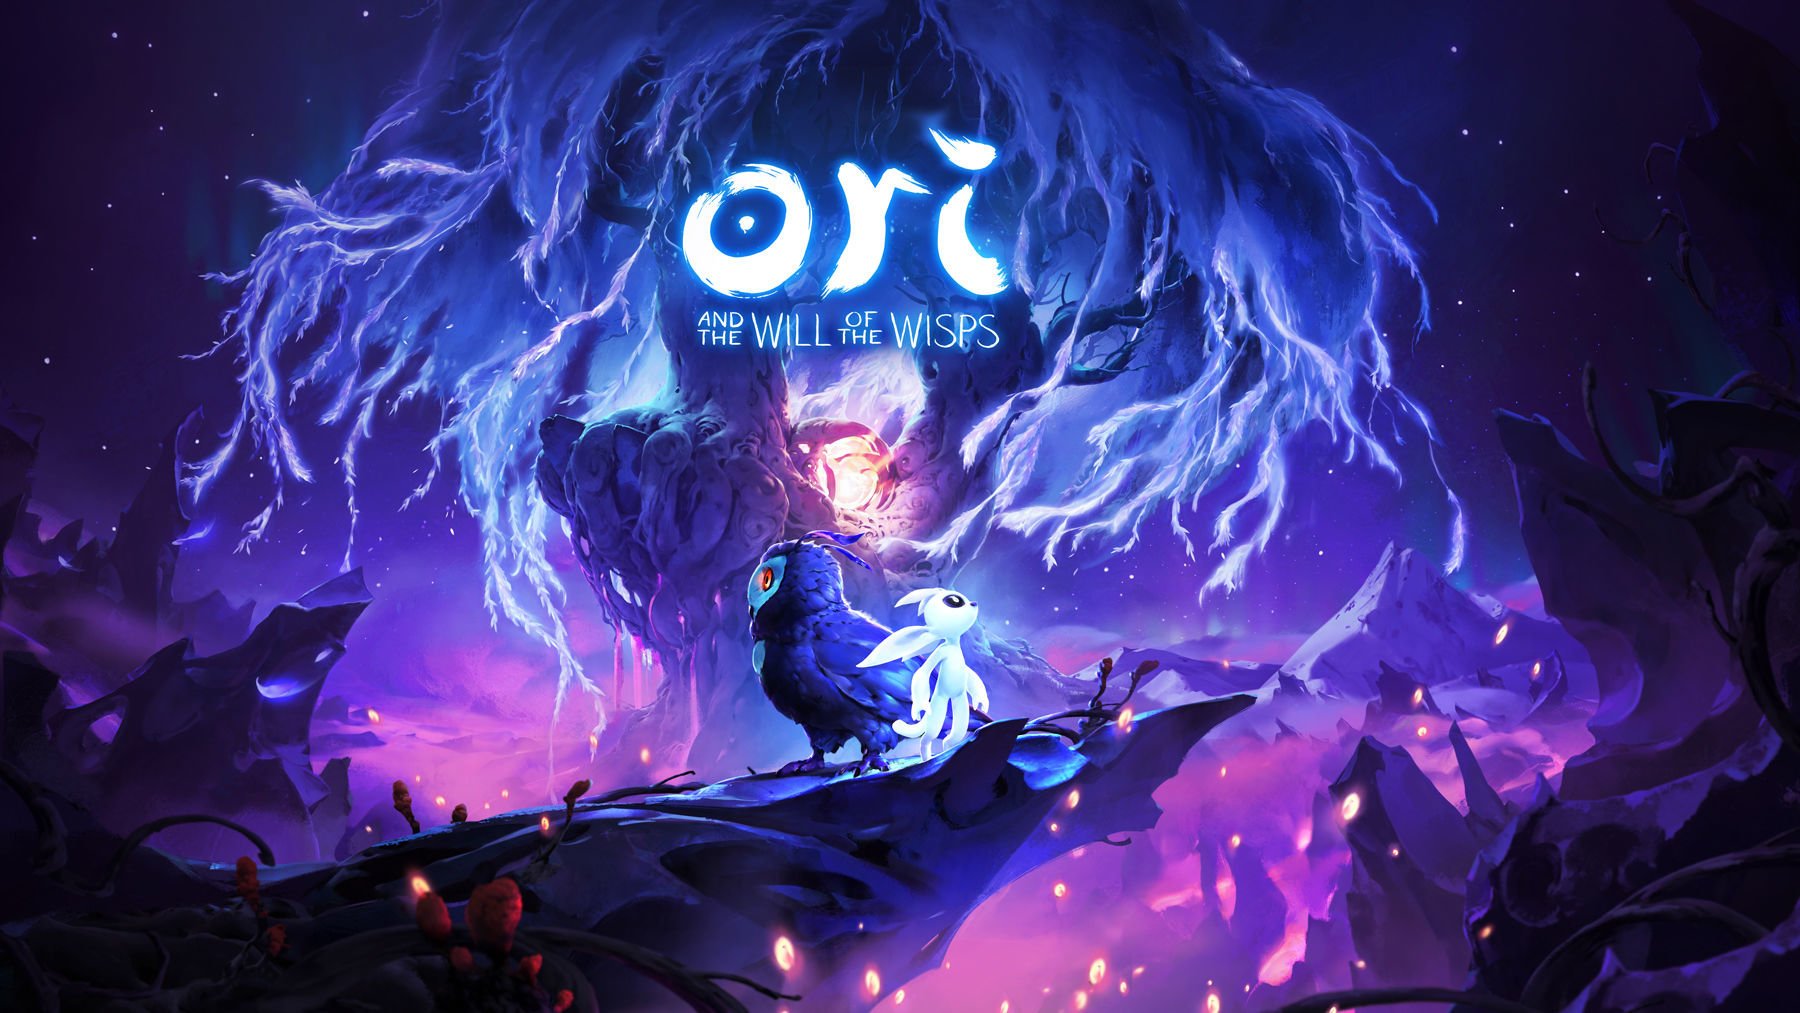 Ori and the will of the wisps na bgs 2019 | dims 2 | pixelhive | ori and the will of the wisps pixelhive